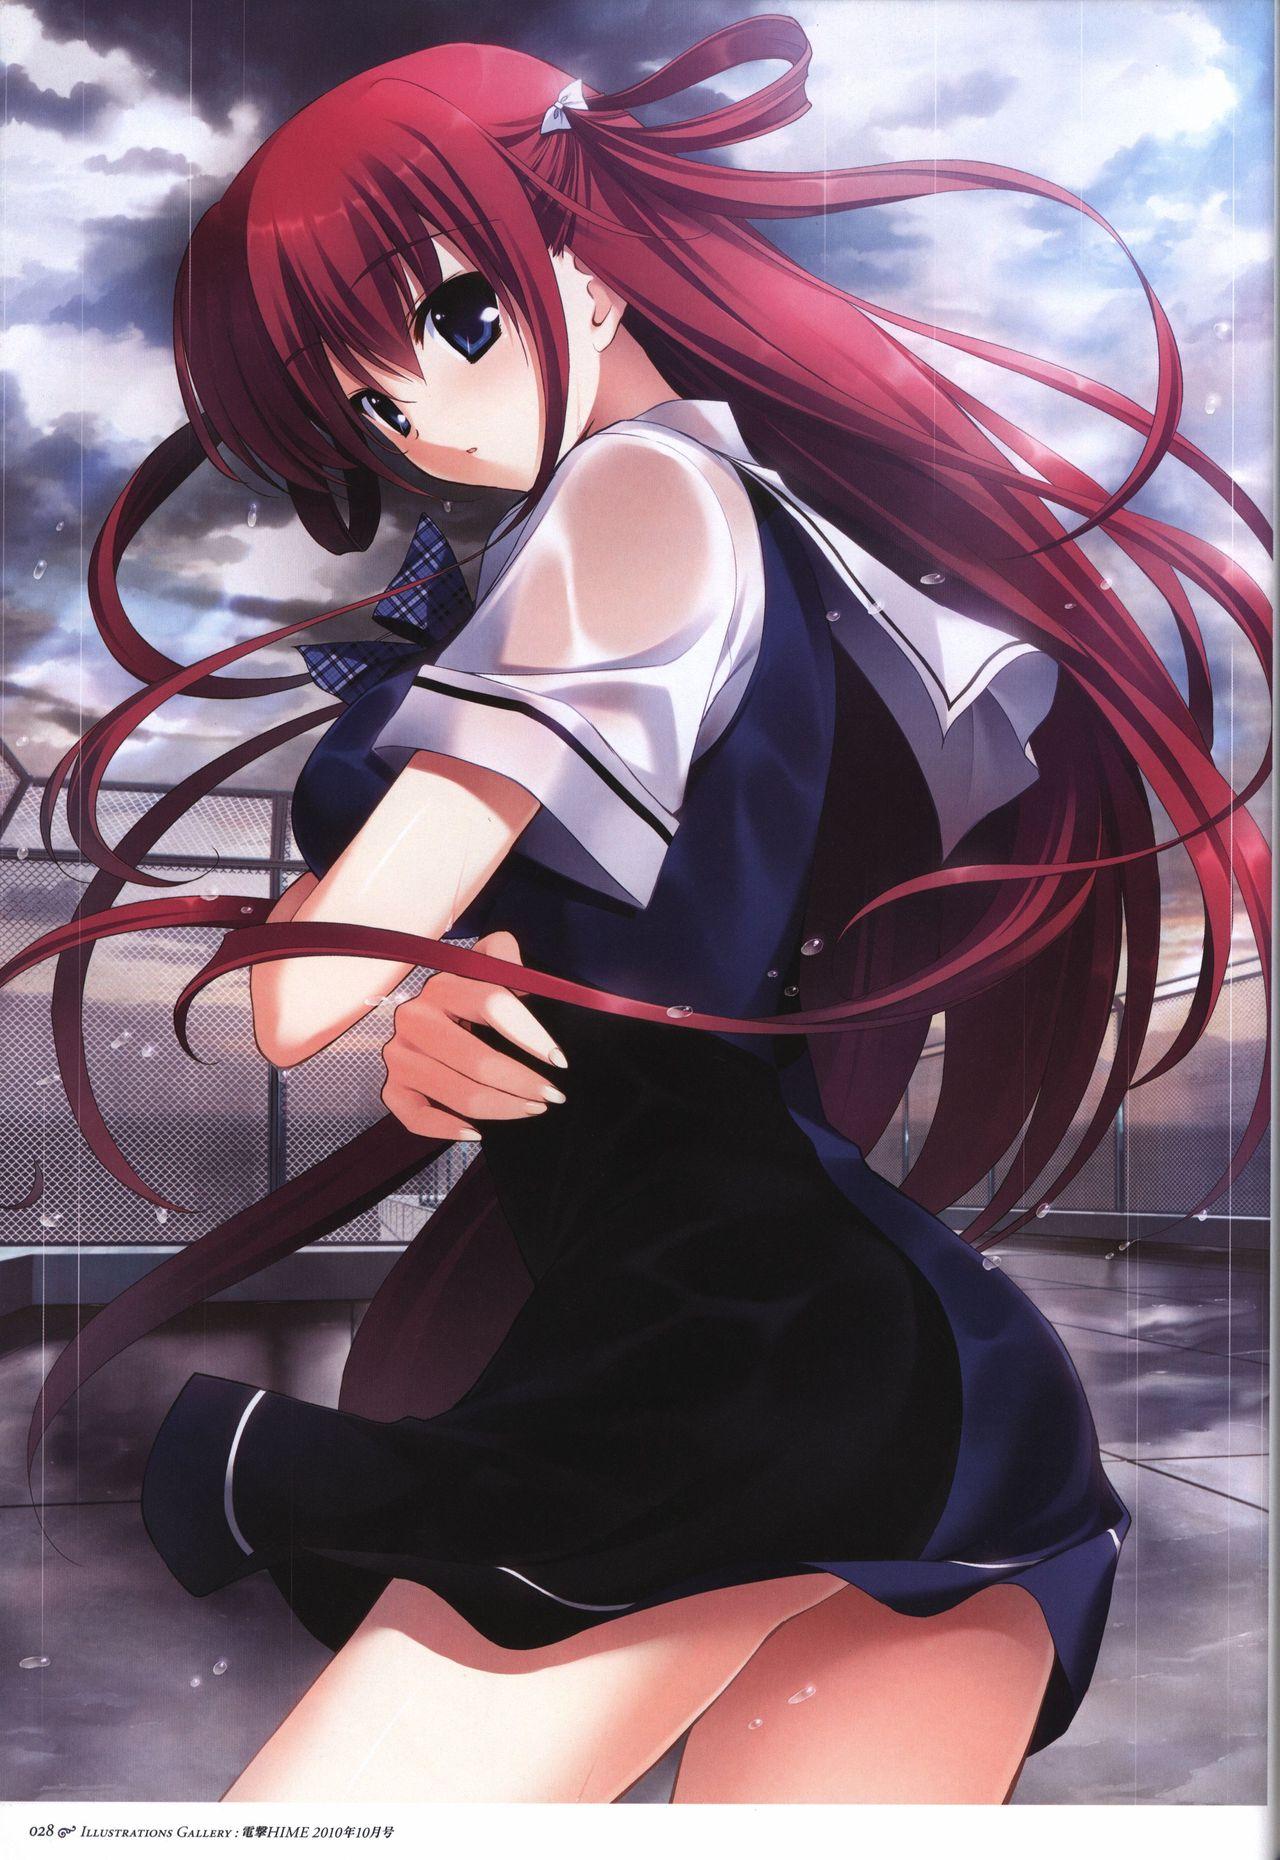 The Fruit of Grisaia Visual FanBook 28